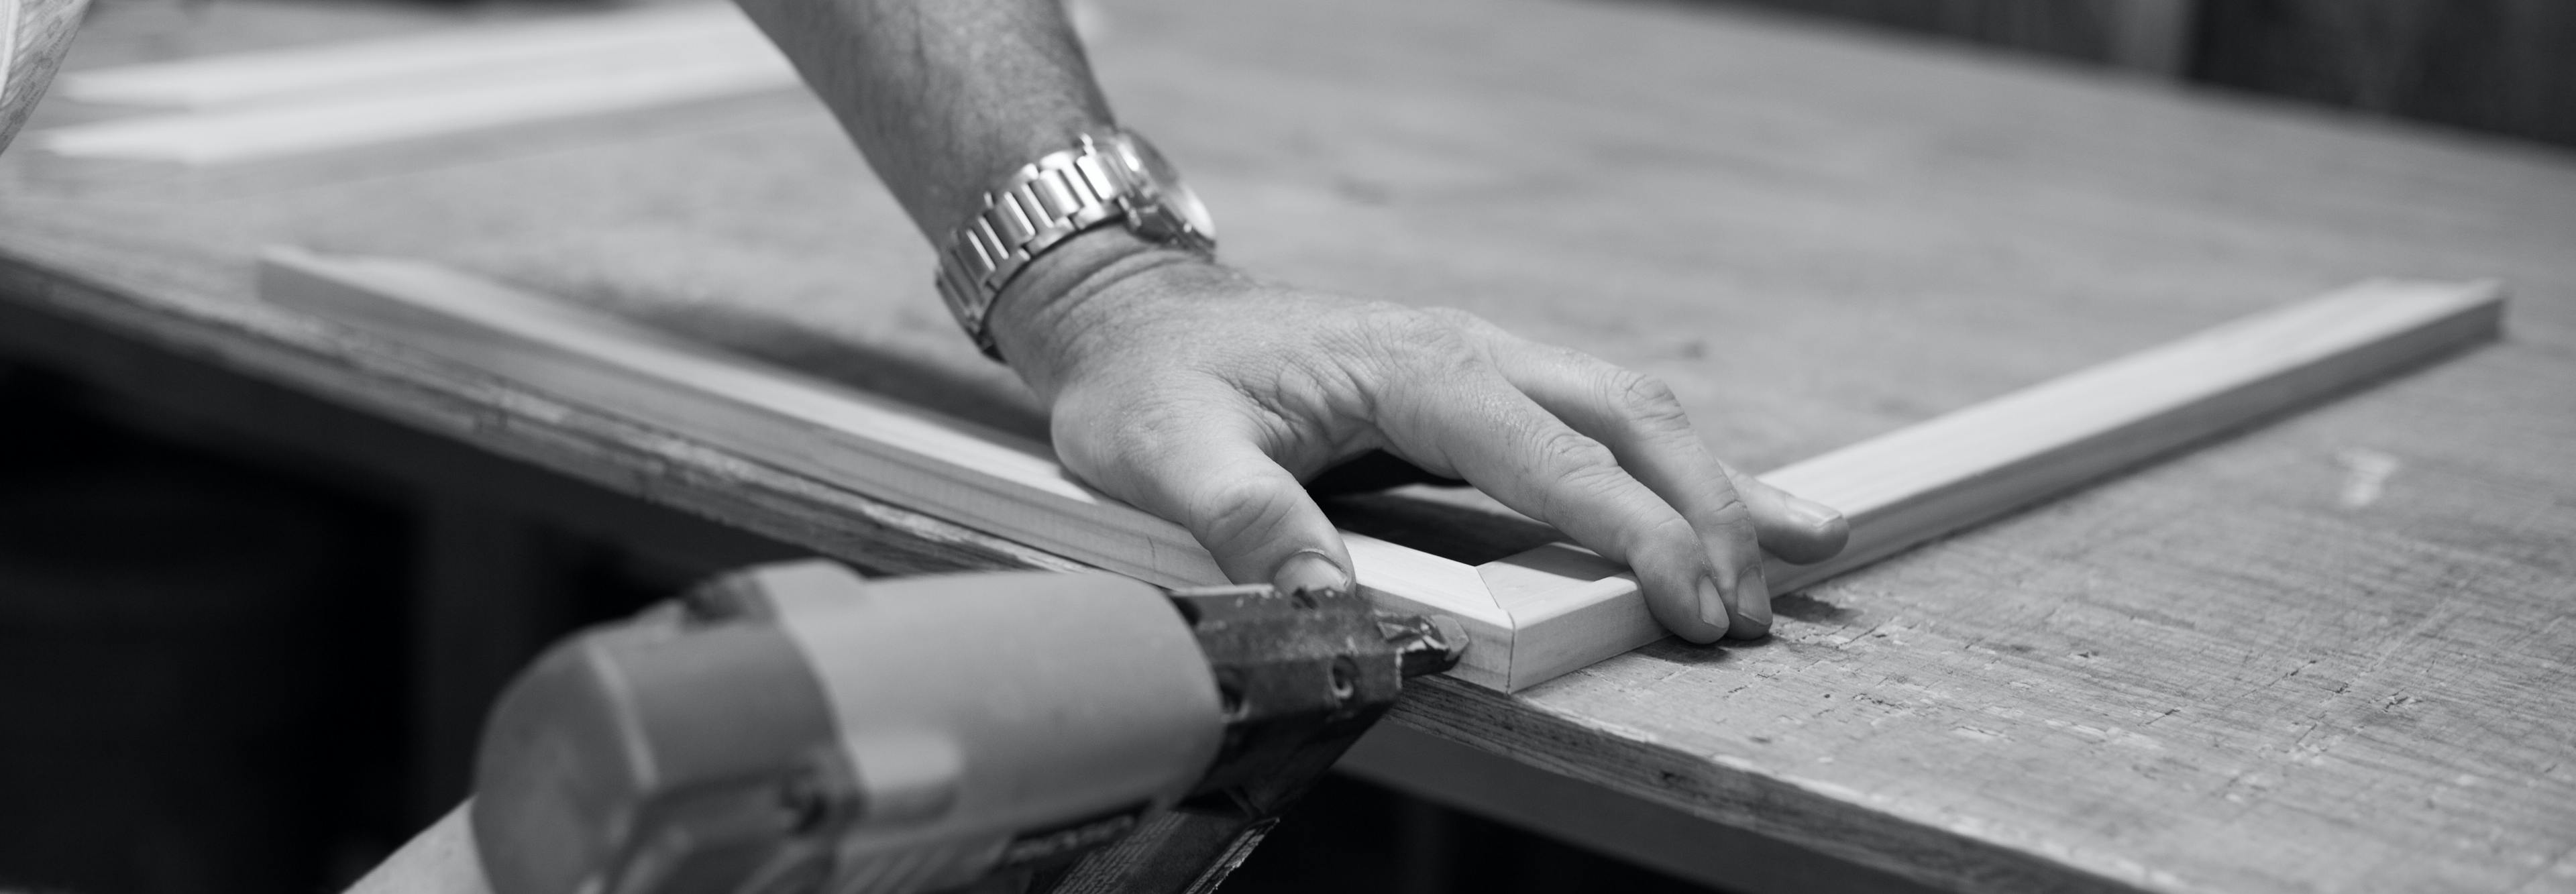 Woodworker carefully nailing a delicate frame.